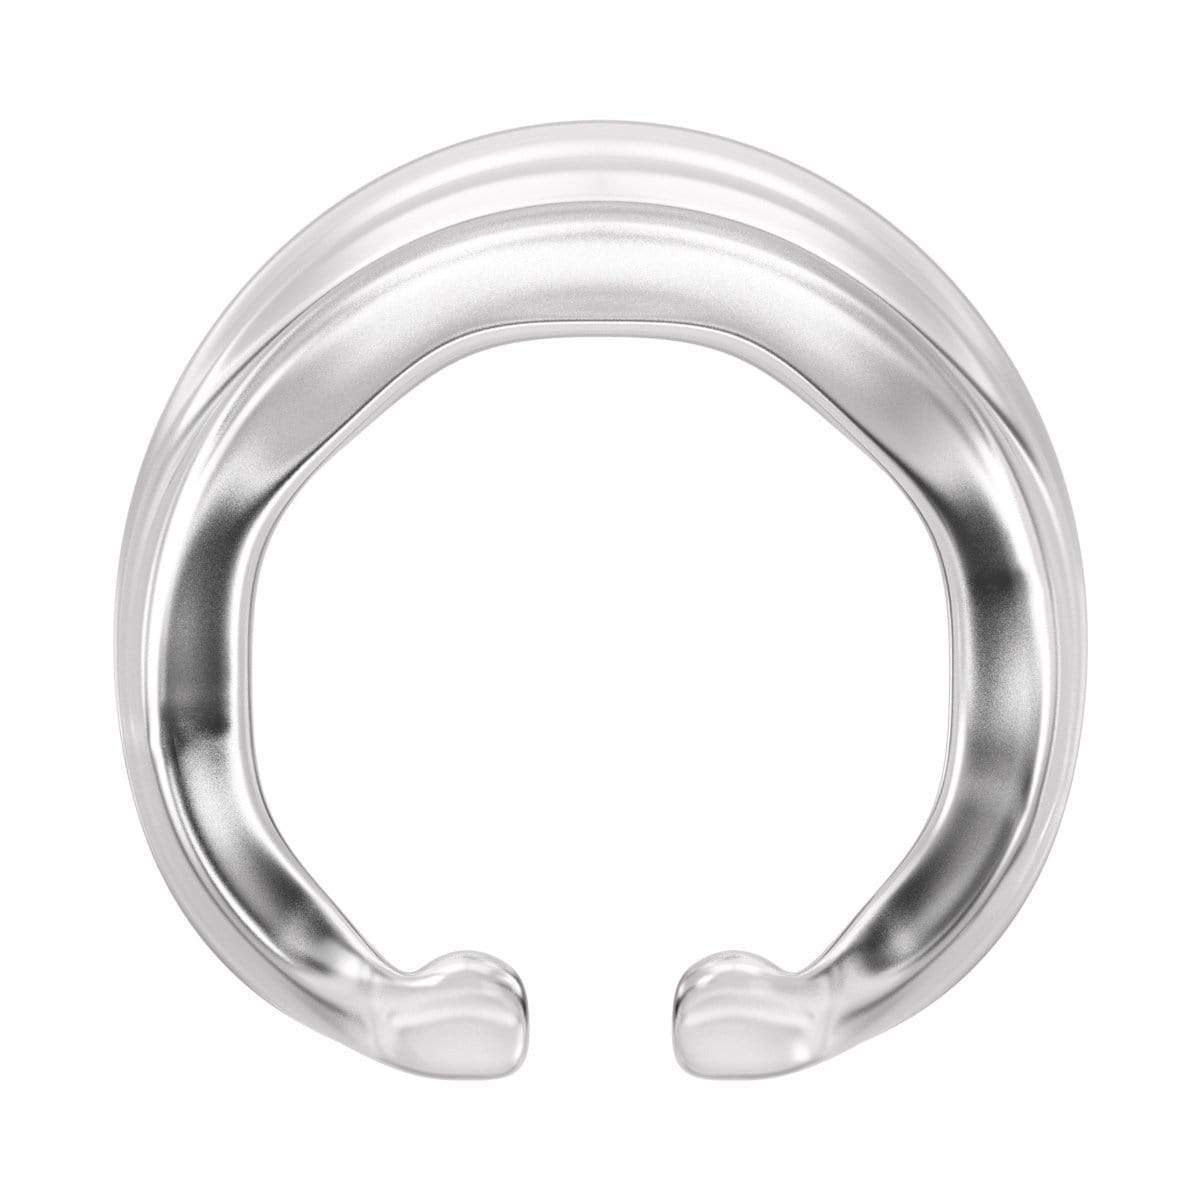 SSI Japan - My Peace Wide Standard Day Size M Correction Cock Ring (Clear) Cock Ring (Non Vibration) 4582137934107 CherryAffairs